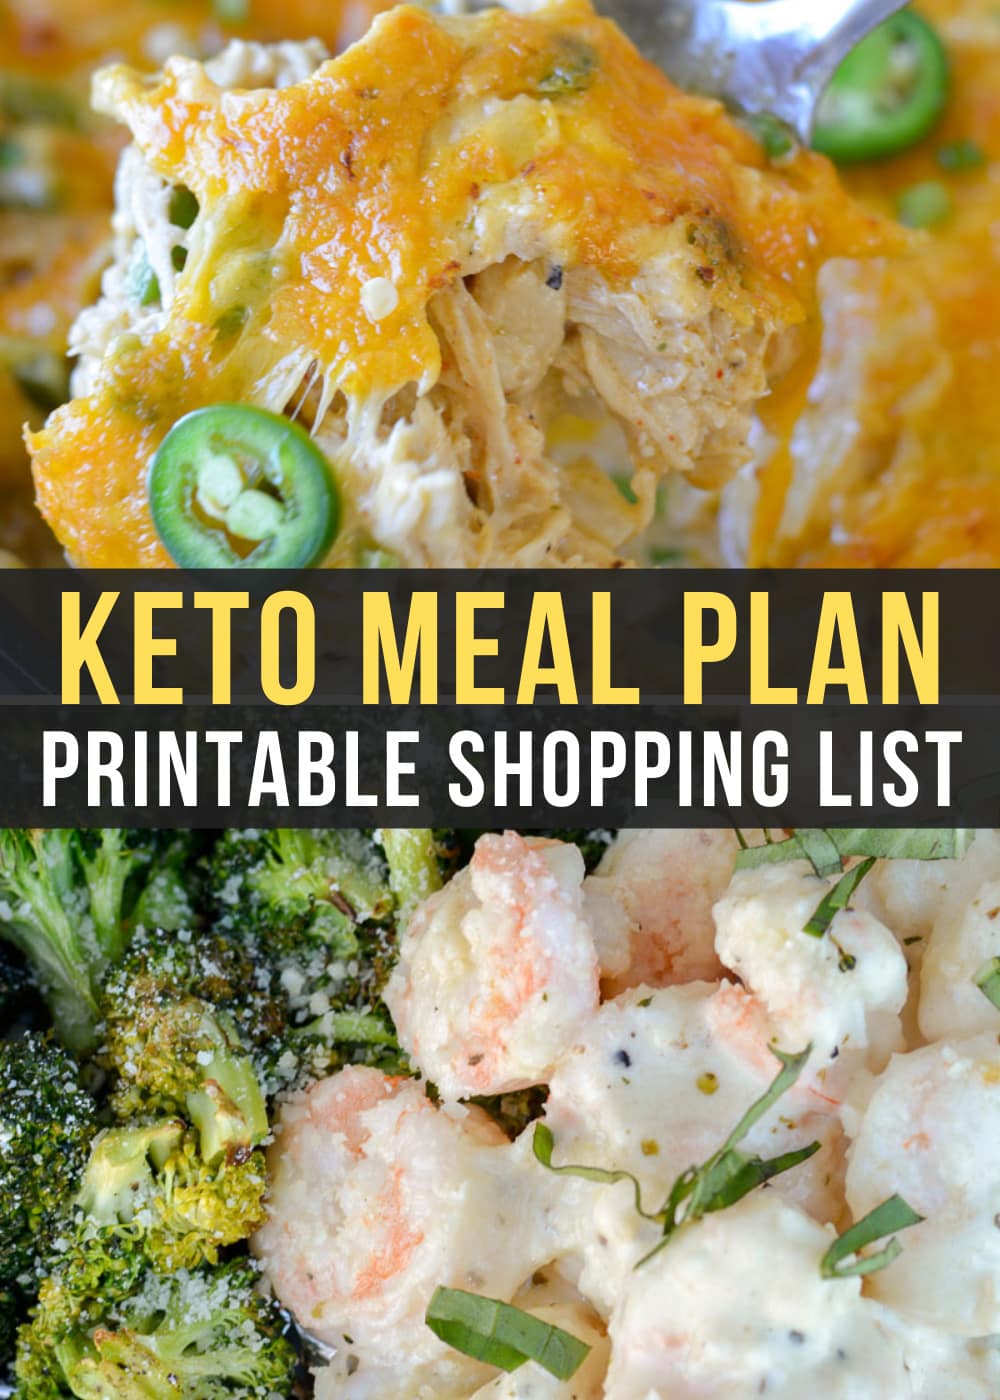 Enjoy delicious low-carb dinners like Jalapeno Popper Chicken Skillet and Keto Shrimp Alfredo in our Easy Keto Meal Plan this week!